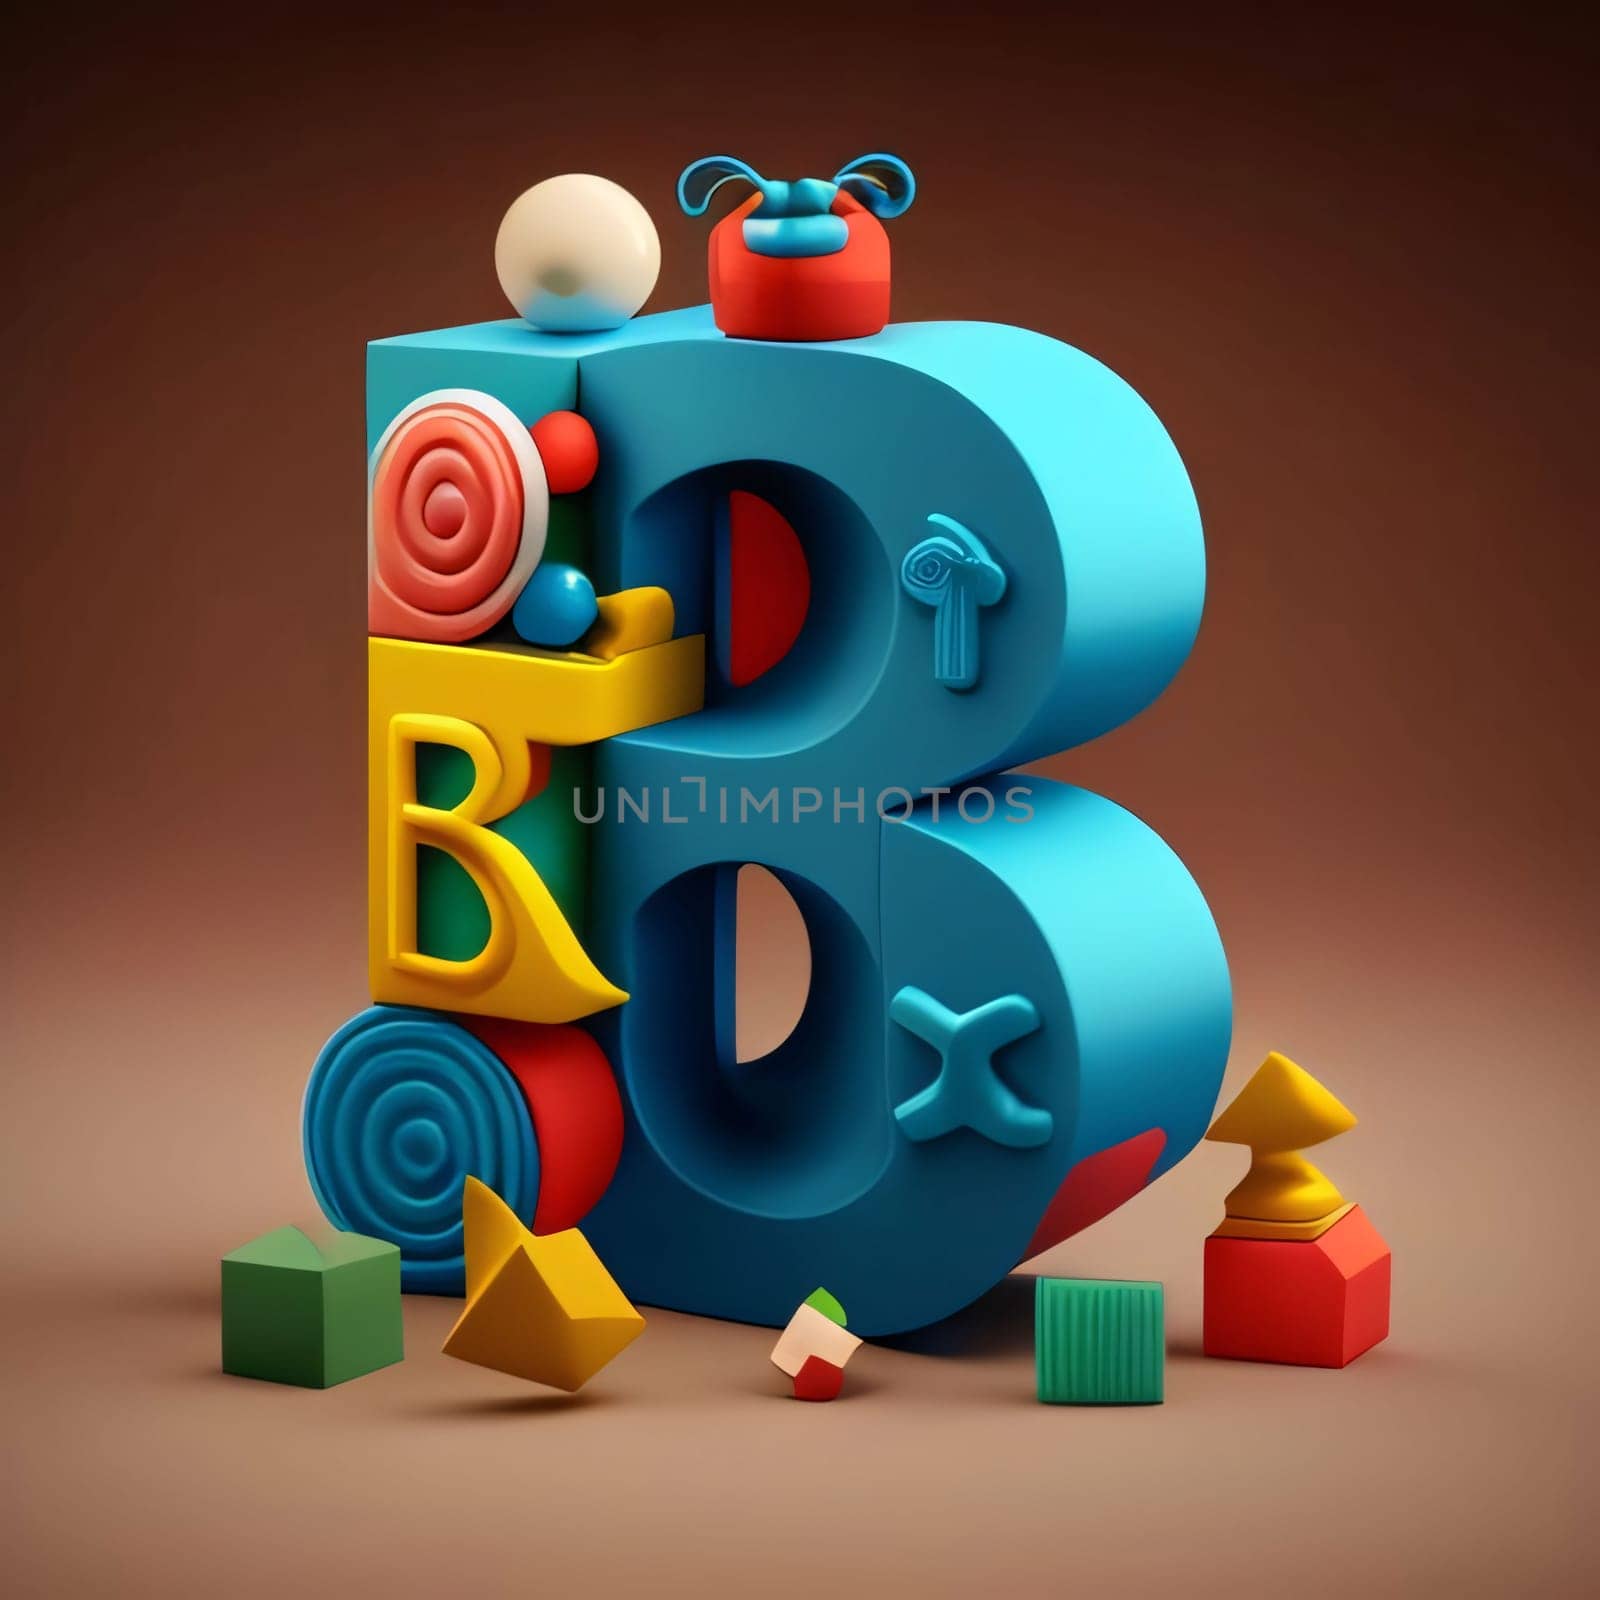 Graphic alphabet letters: 3d illustration of letter B in the form of children's toys